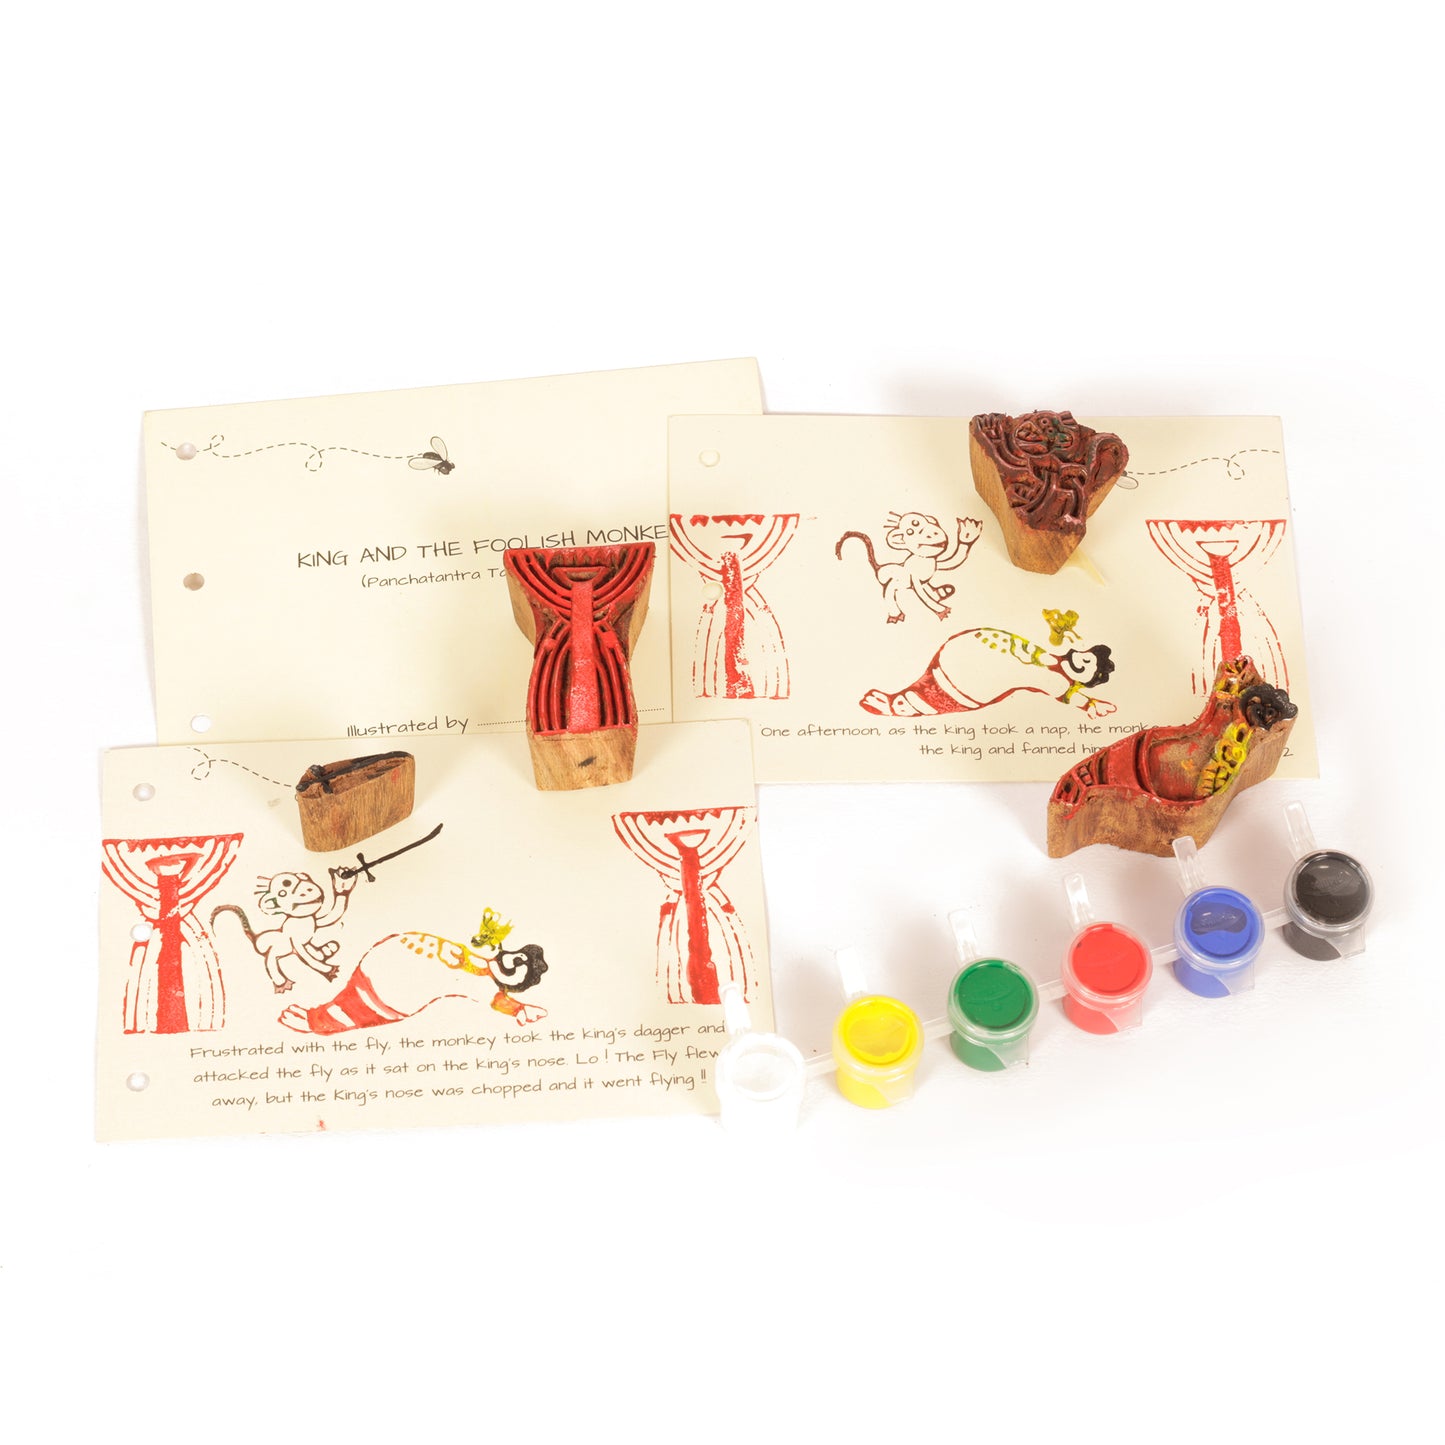 DIY Wooden Block Printing Craft kit Print your own Panchtantra Story book King and The Foolish Monkey